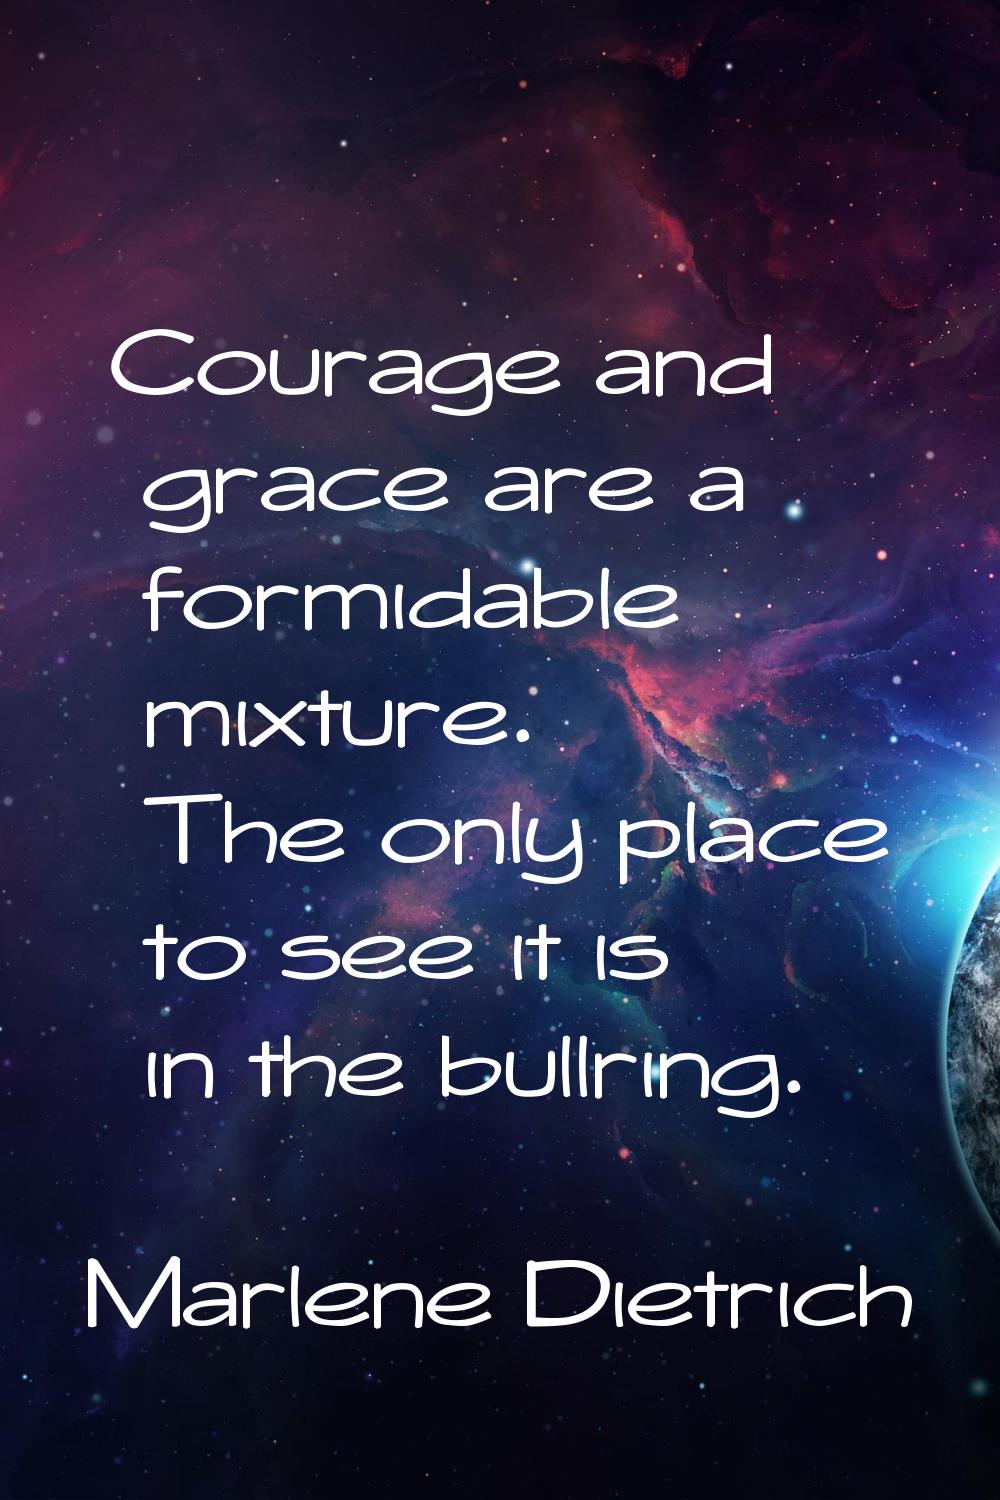 Courage and grace are a formidable mixture. The only place to see it is in the bullring.